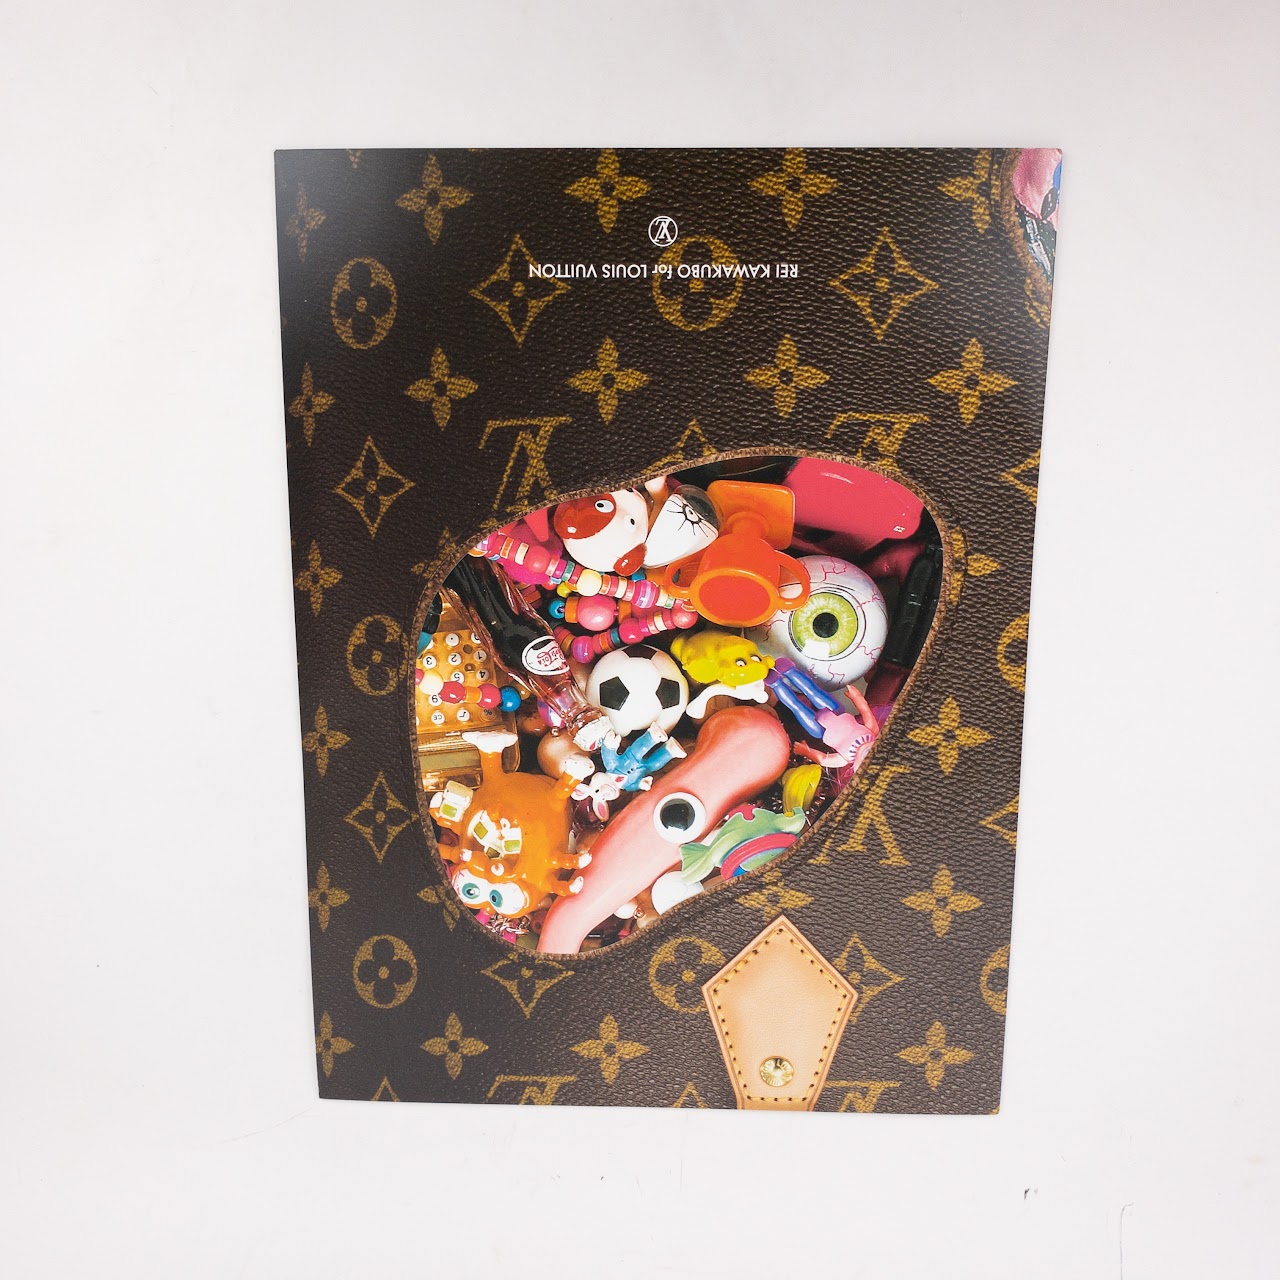 Louis Vuitton on X: A bold and stylish start to the New Year is like  clockwork at the #LVGiftWorkshop:    / X